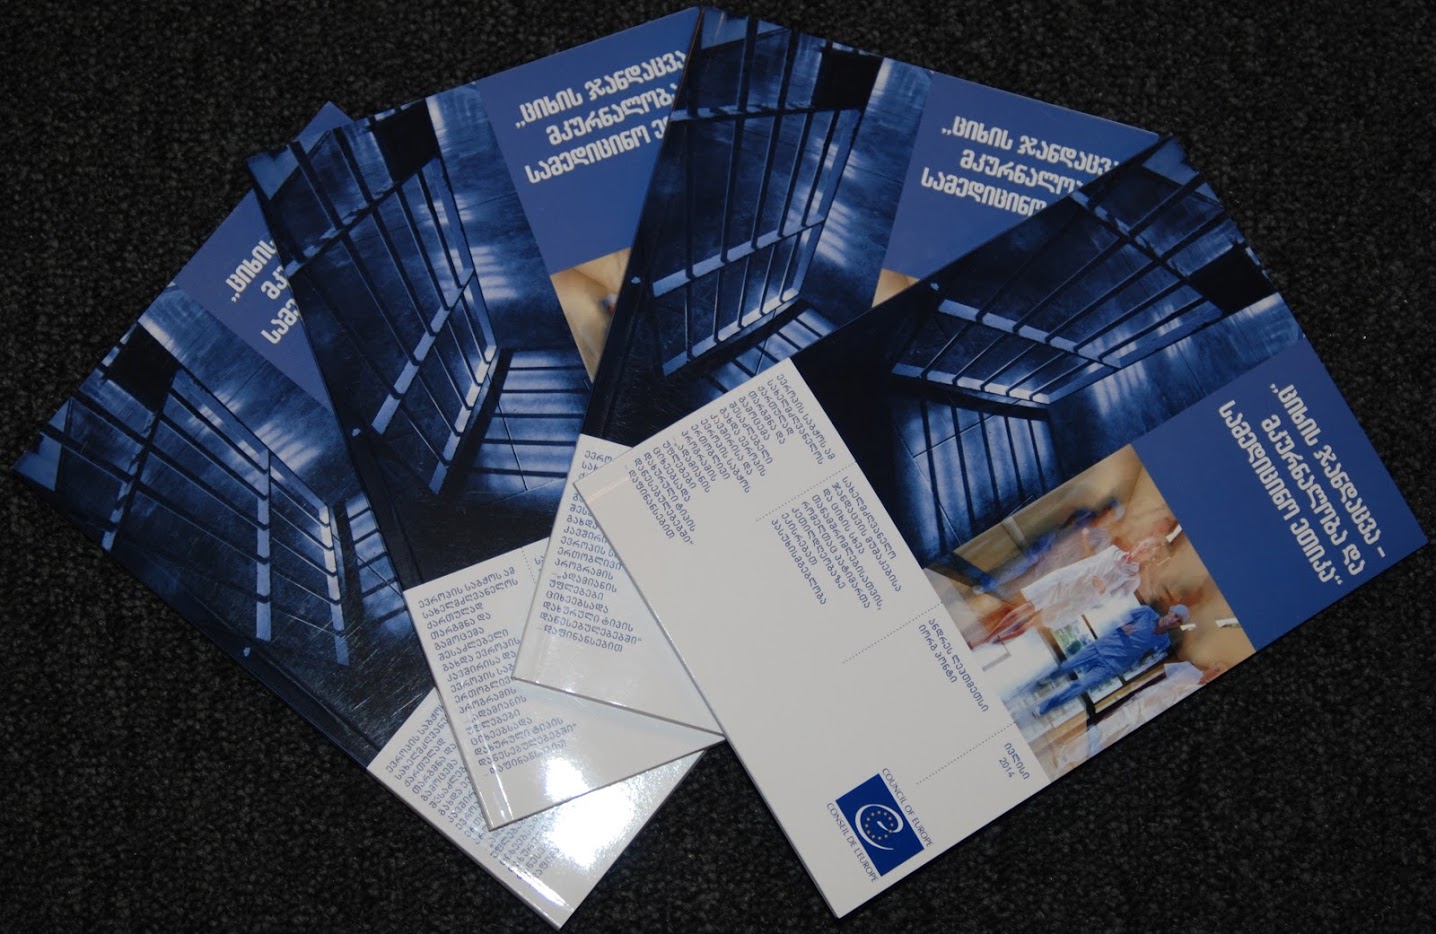 500 copies of a Council of Europe publication, Manual on “Prison Healthcare and Medical Ethics” were translated and published